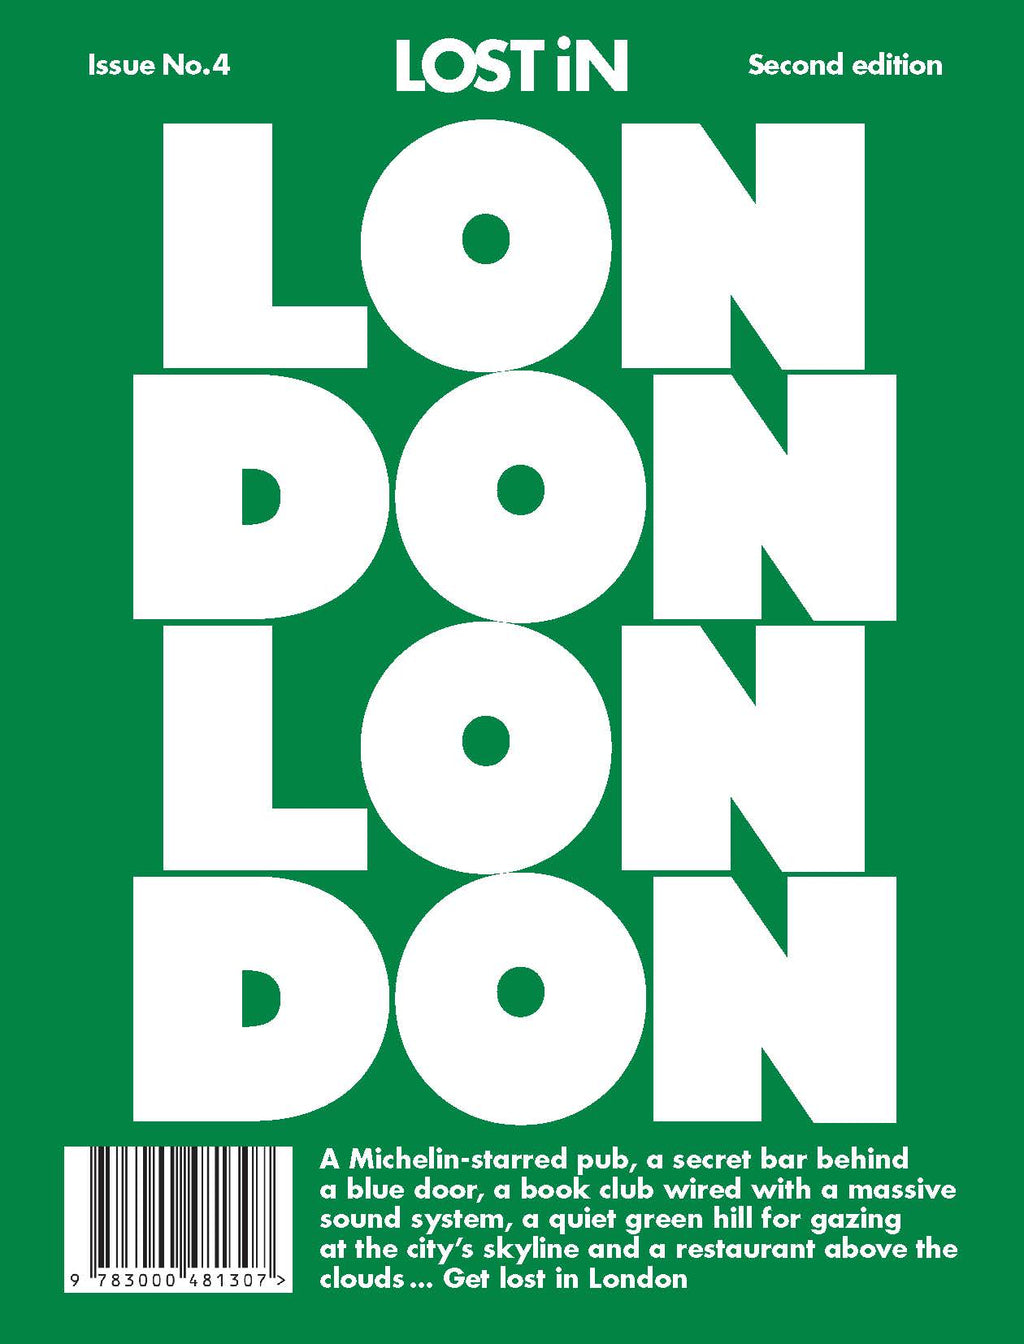 New mags wallpaper city guide london book